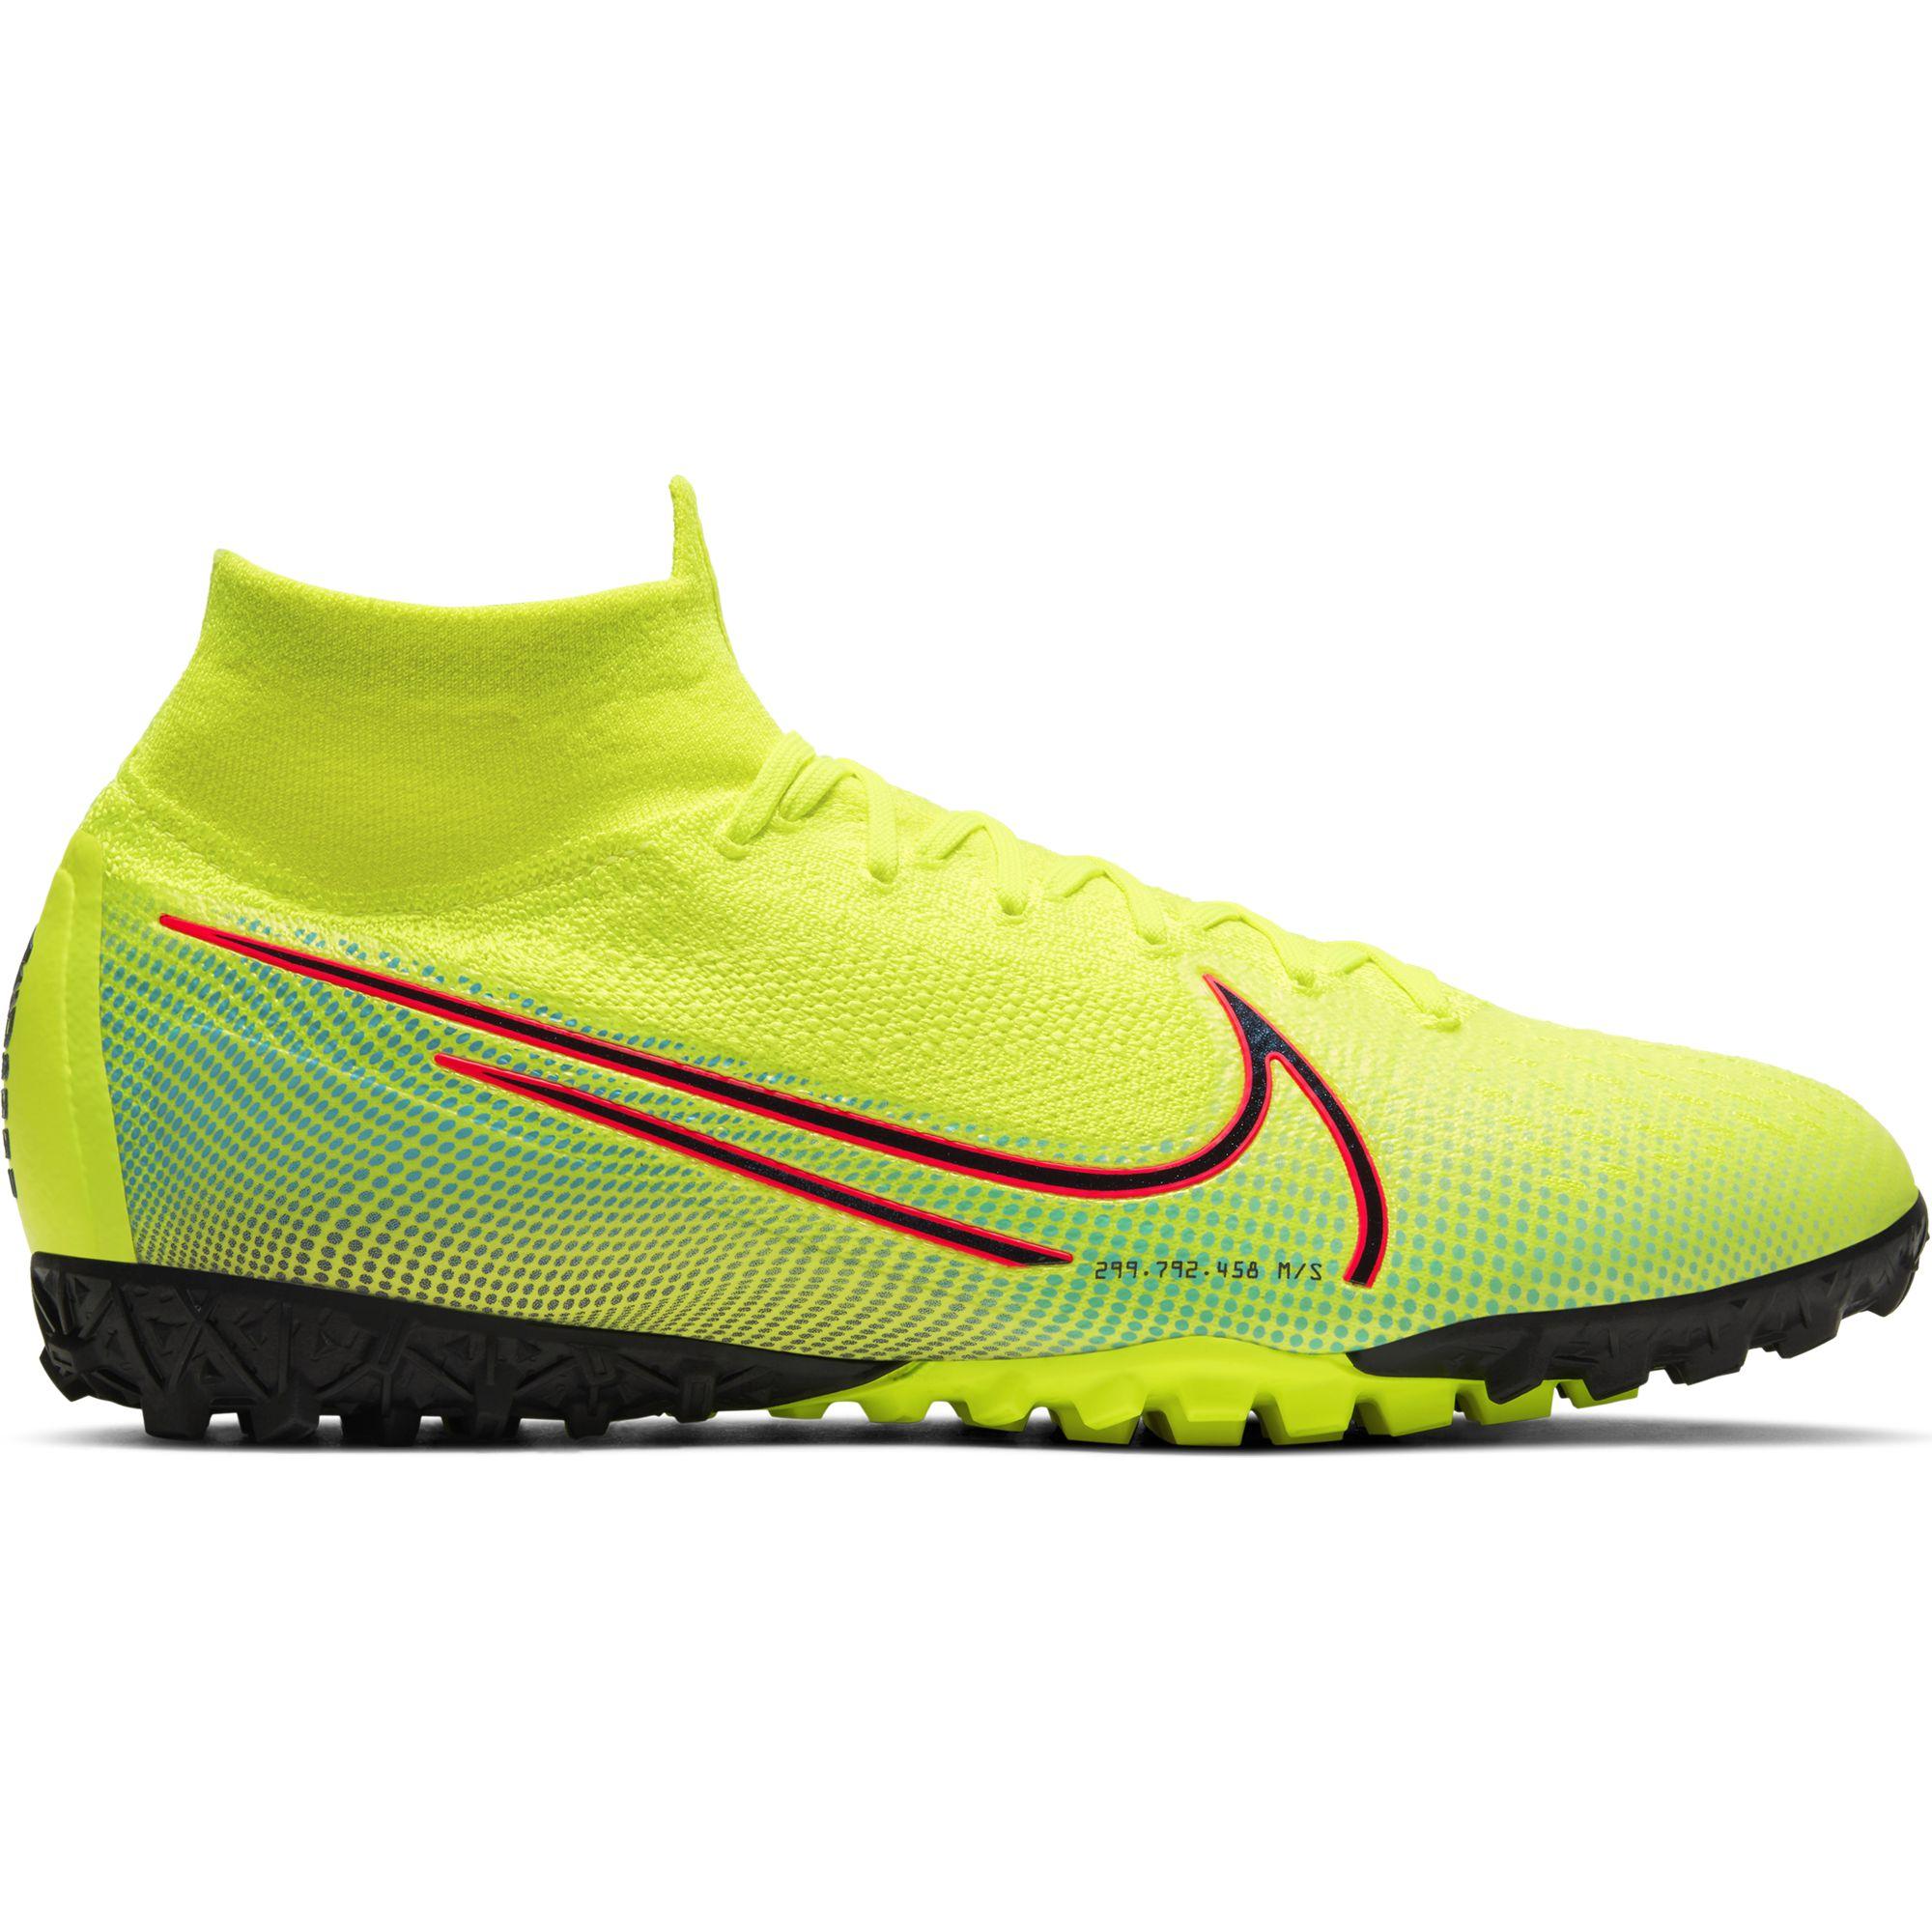 Nike Mercurial Superfly 7 Elite FG Soccer Cleats Numeric 10.